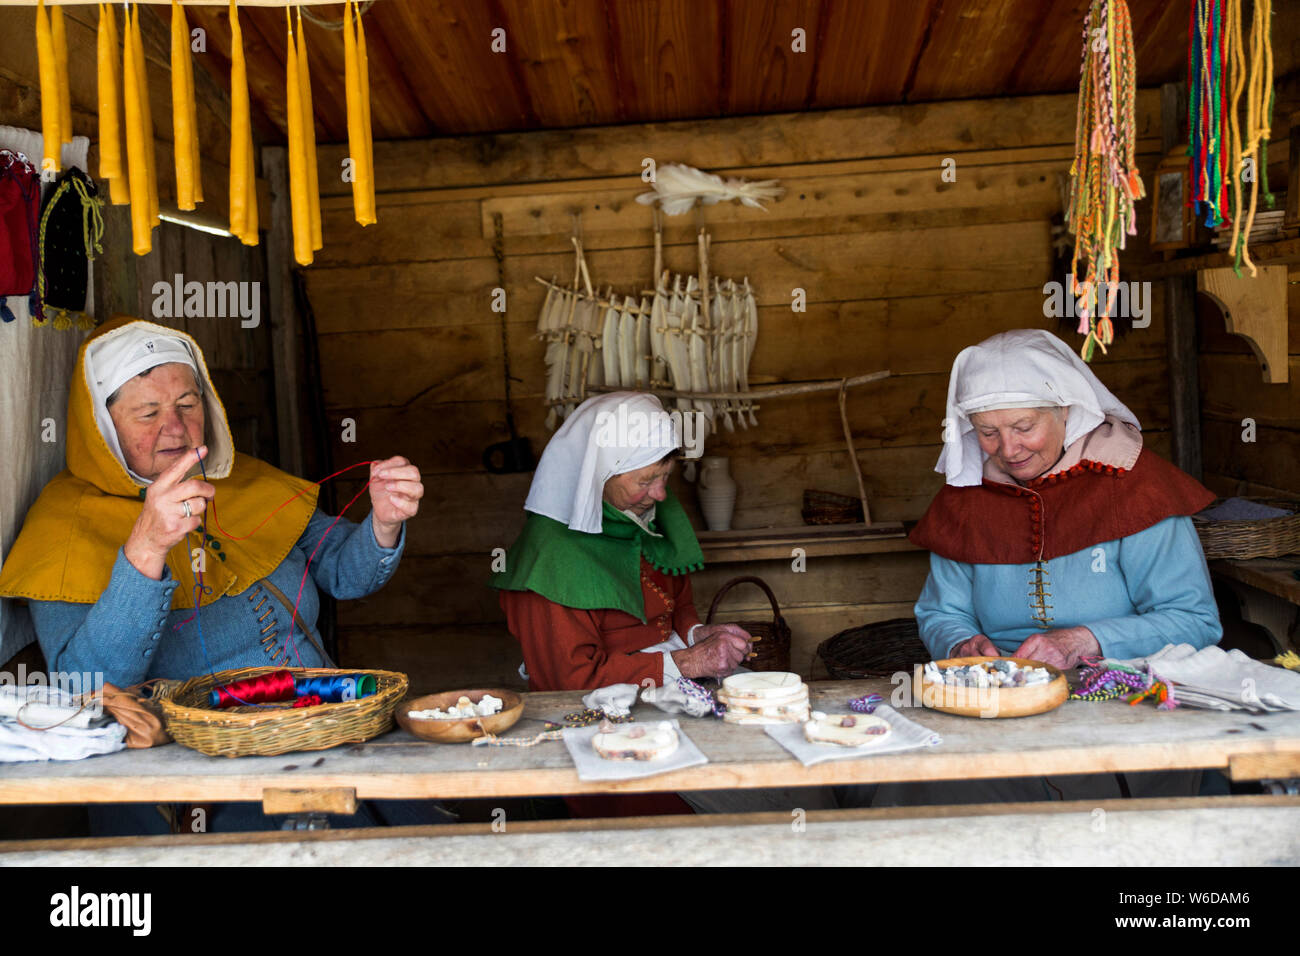 Women in traditional folk costume in a traders booth at the outdoor Medieval Centre in Nykøbing Falster, Denmark. The Medieval Centre is built around the village Sundkøbing at a fjord as it was around the year 1400. Houses are authentically designed and built with the people who populate the village, men, women, children, peasants, craftsmen, warriors and knights etc dressing and work as they would back in 1400.  Canons and large trebuchets can be seen firing missiles, knights in armour on horseback competing with lances and swords, dyers colouring textiles with plants and in the convent garde Stock Photo